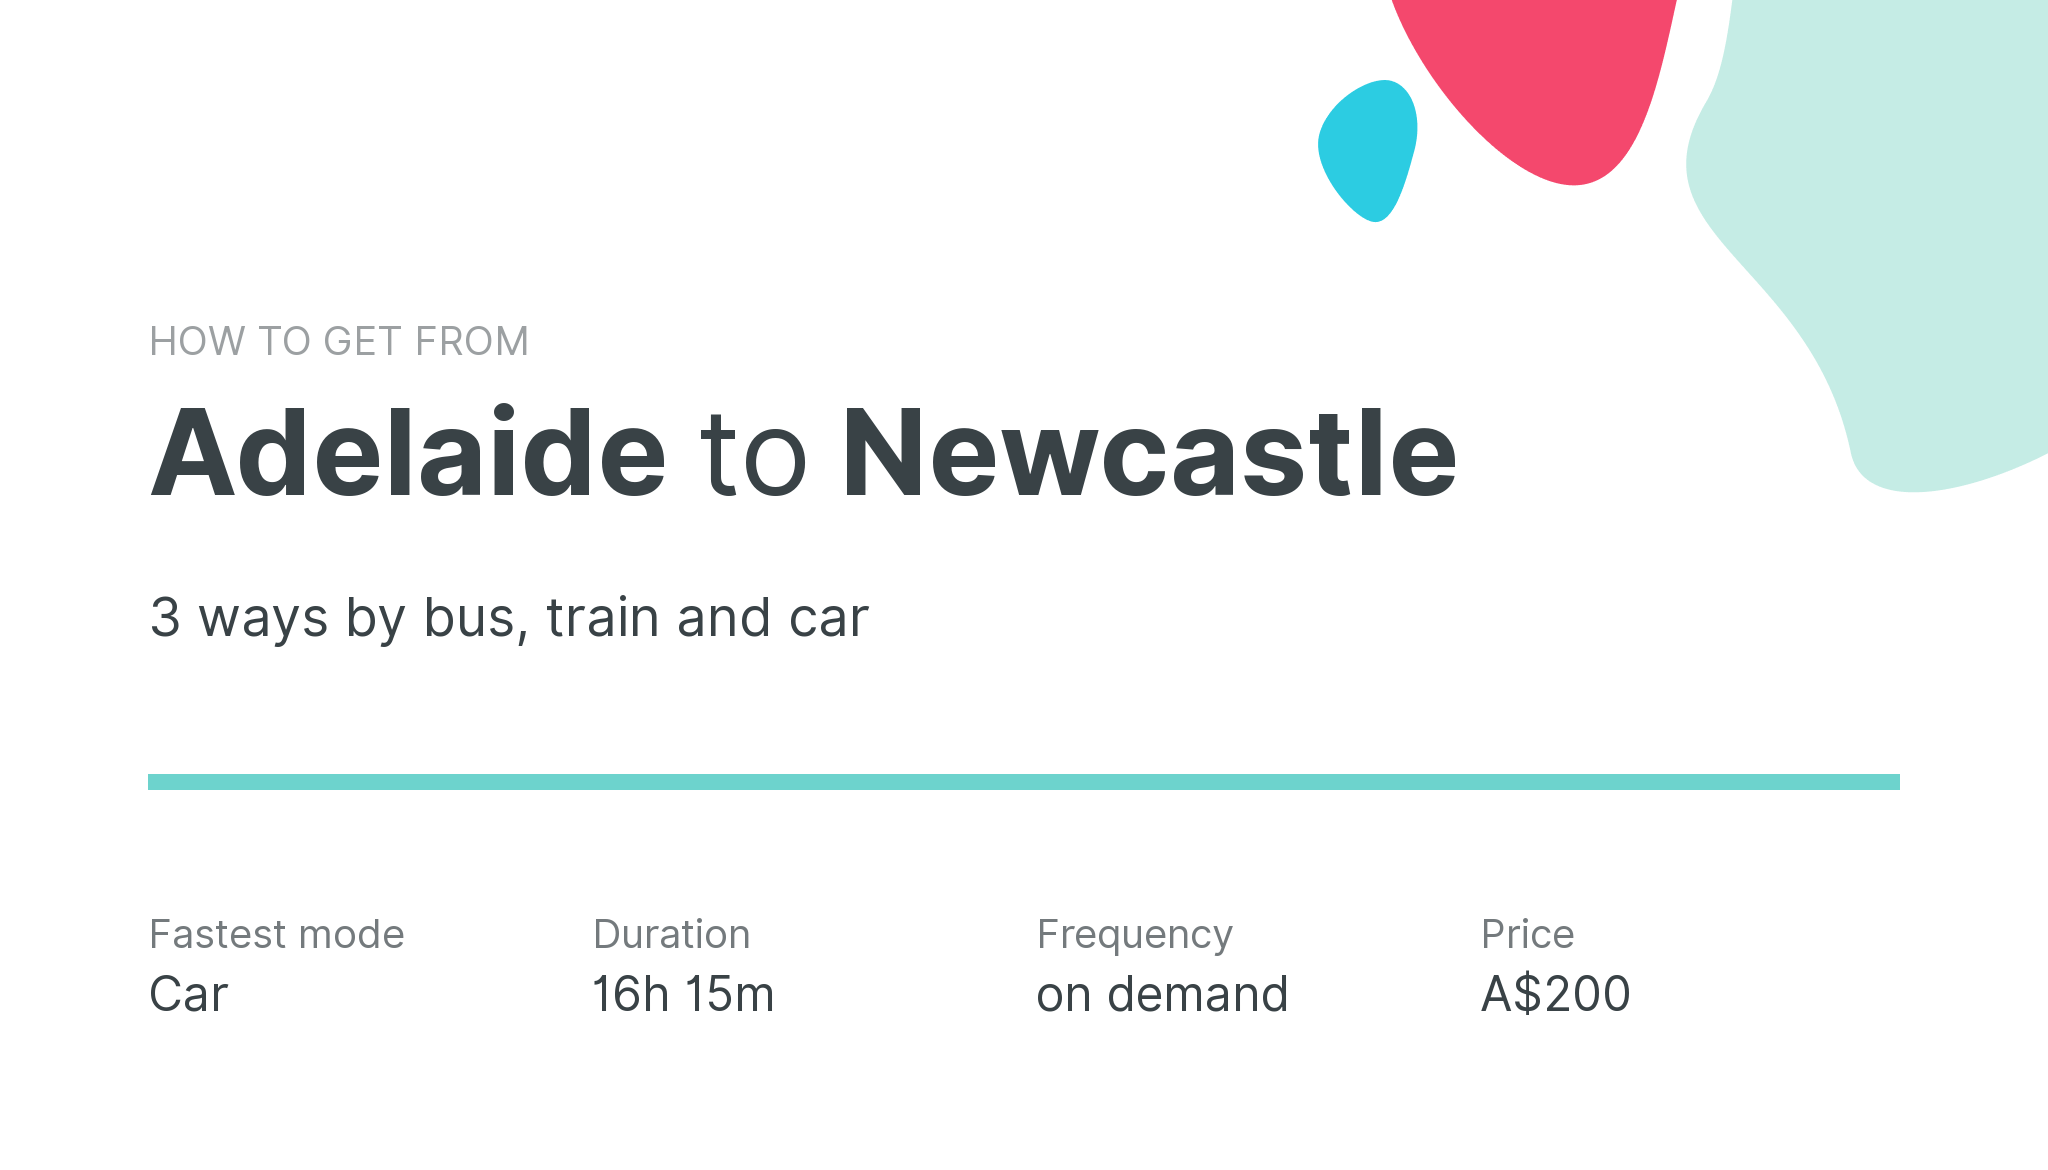 How do I get from Adelaide to Newcastle